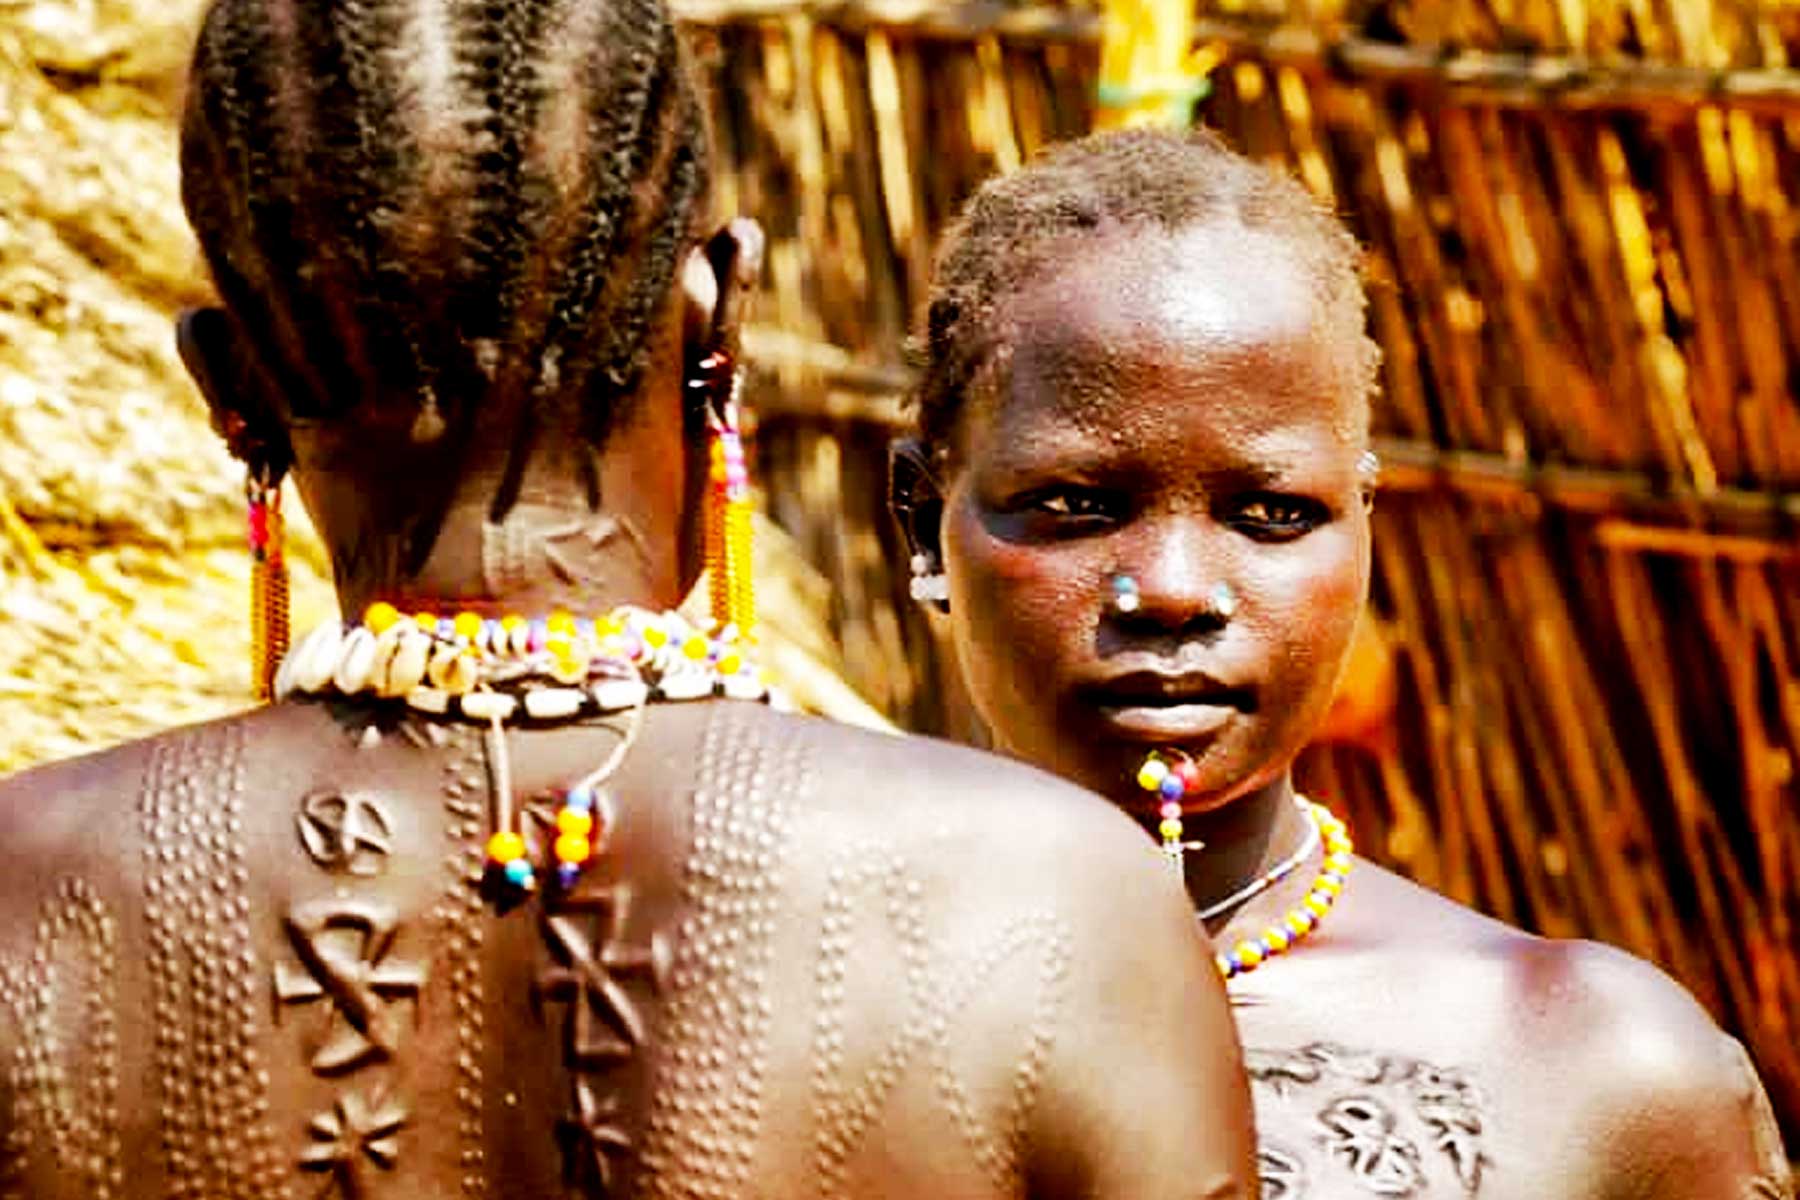 10-days-best-of-south-sudan-cultural-expedition-tour